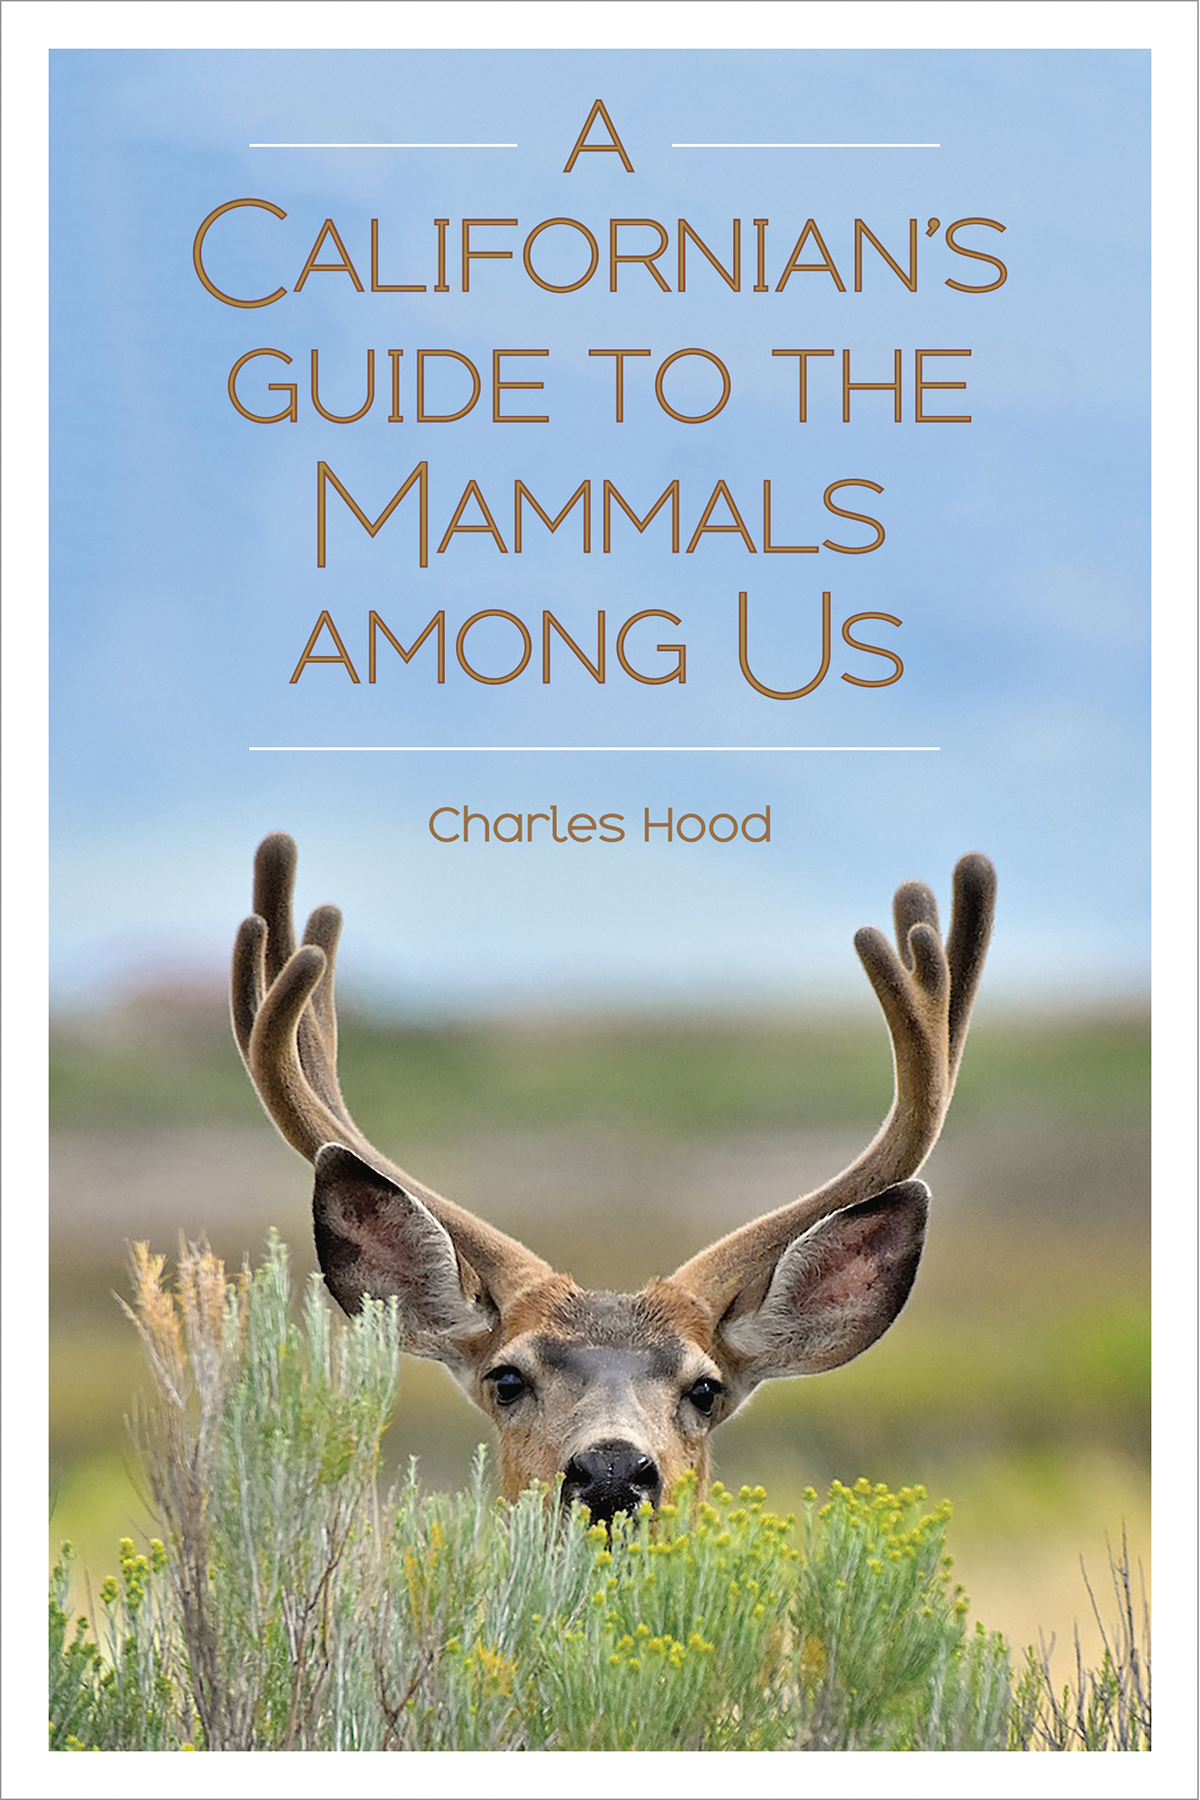 A Californian’s Guide to the Mammals Among Us